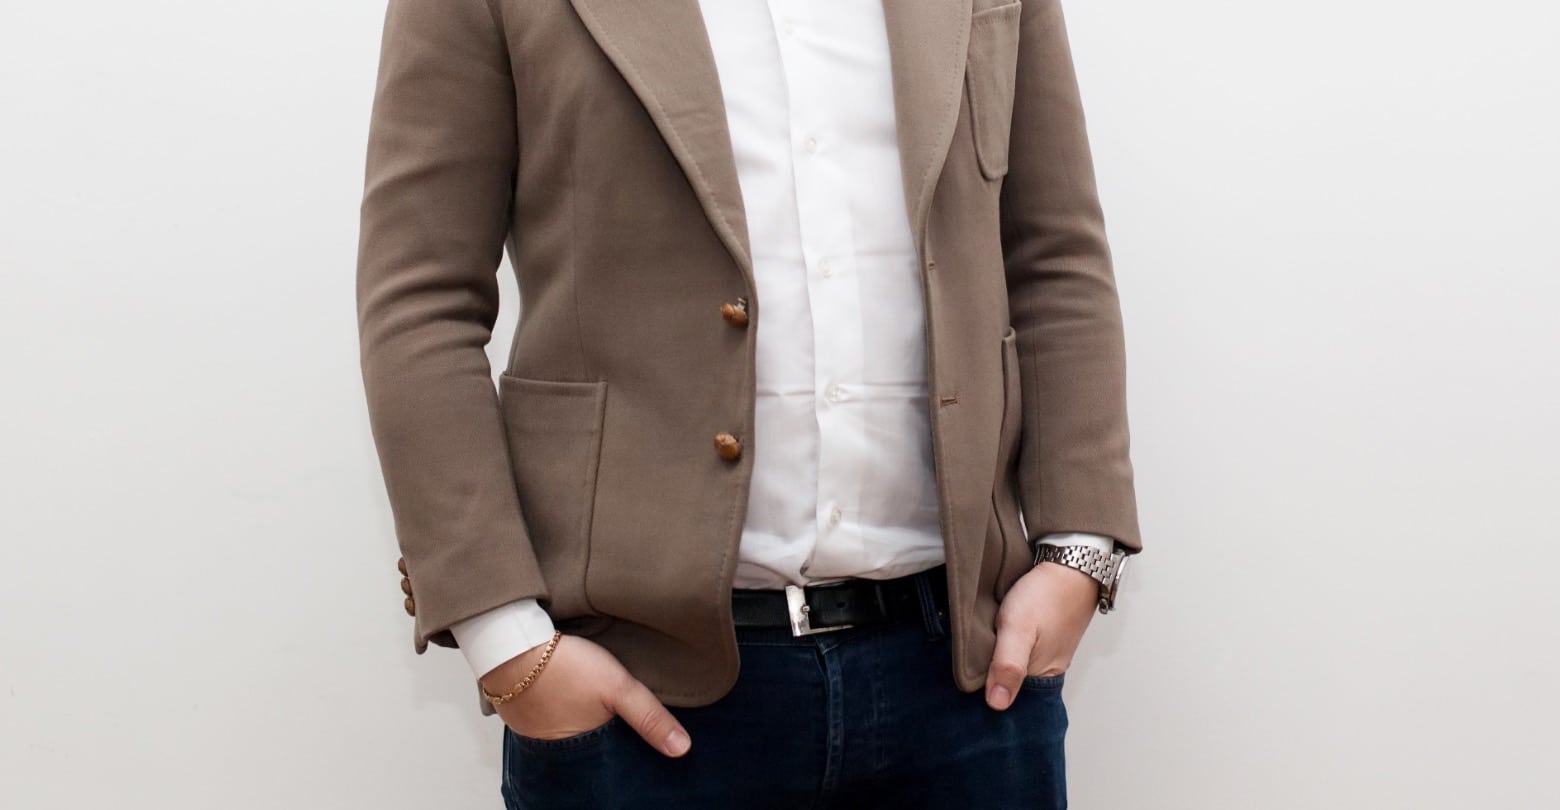 Body Language image of a man with his thumbs out of pockets